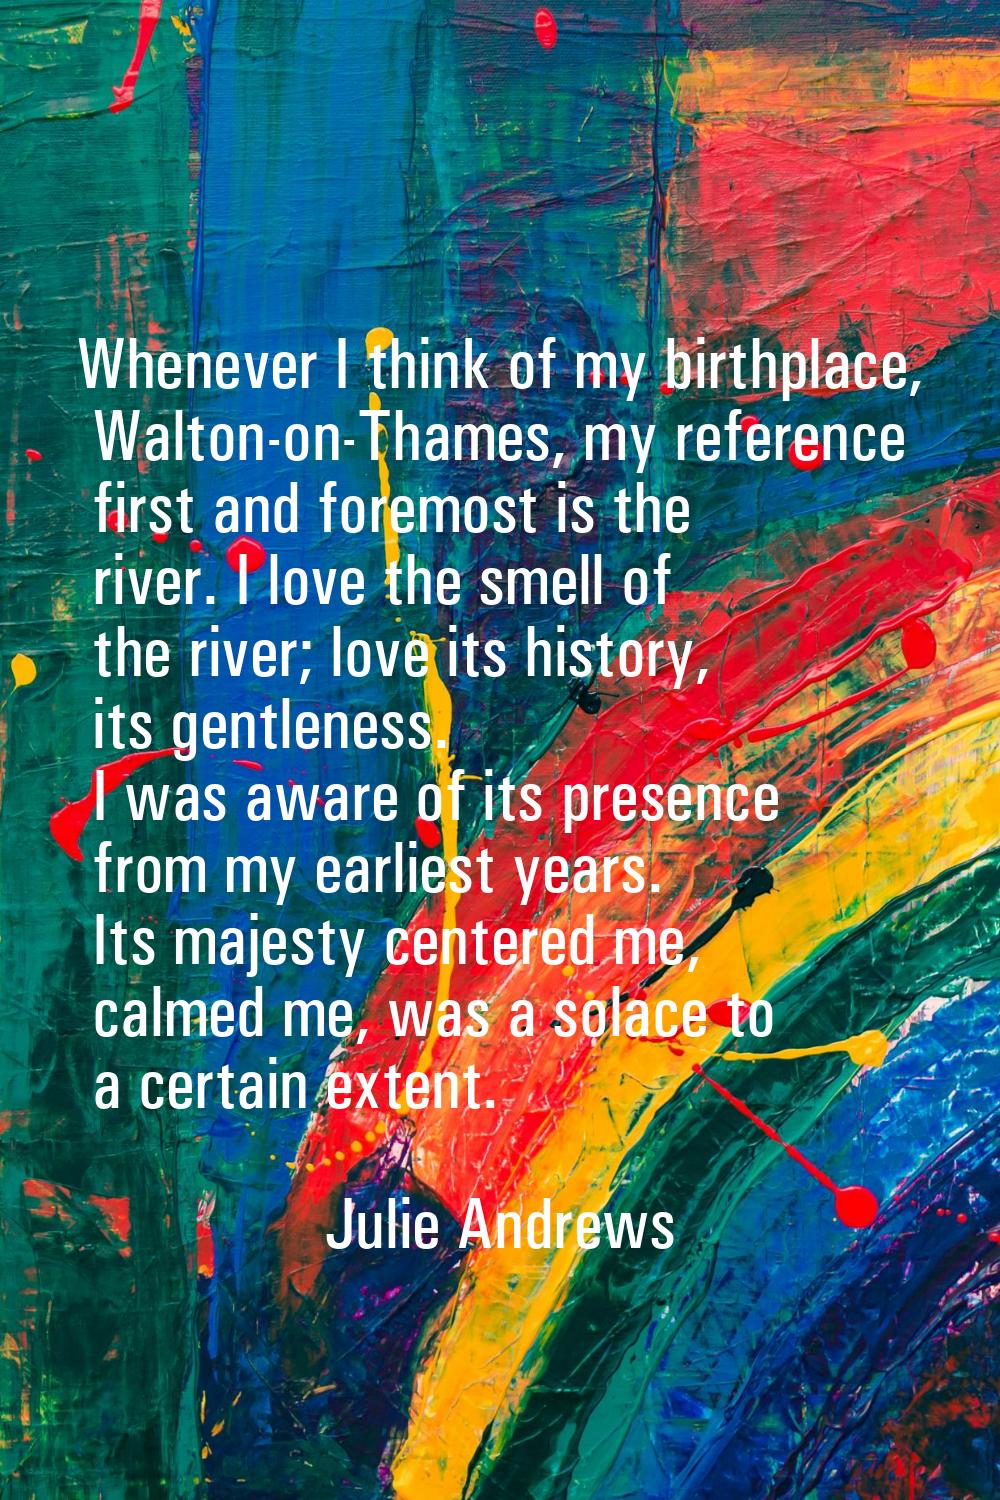 Whenever I think of my birthplace, Walton-on-Thames, my reference first and foremost is the river. 